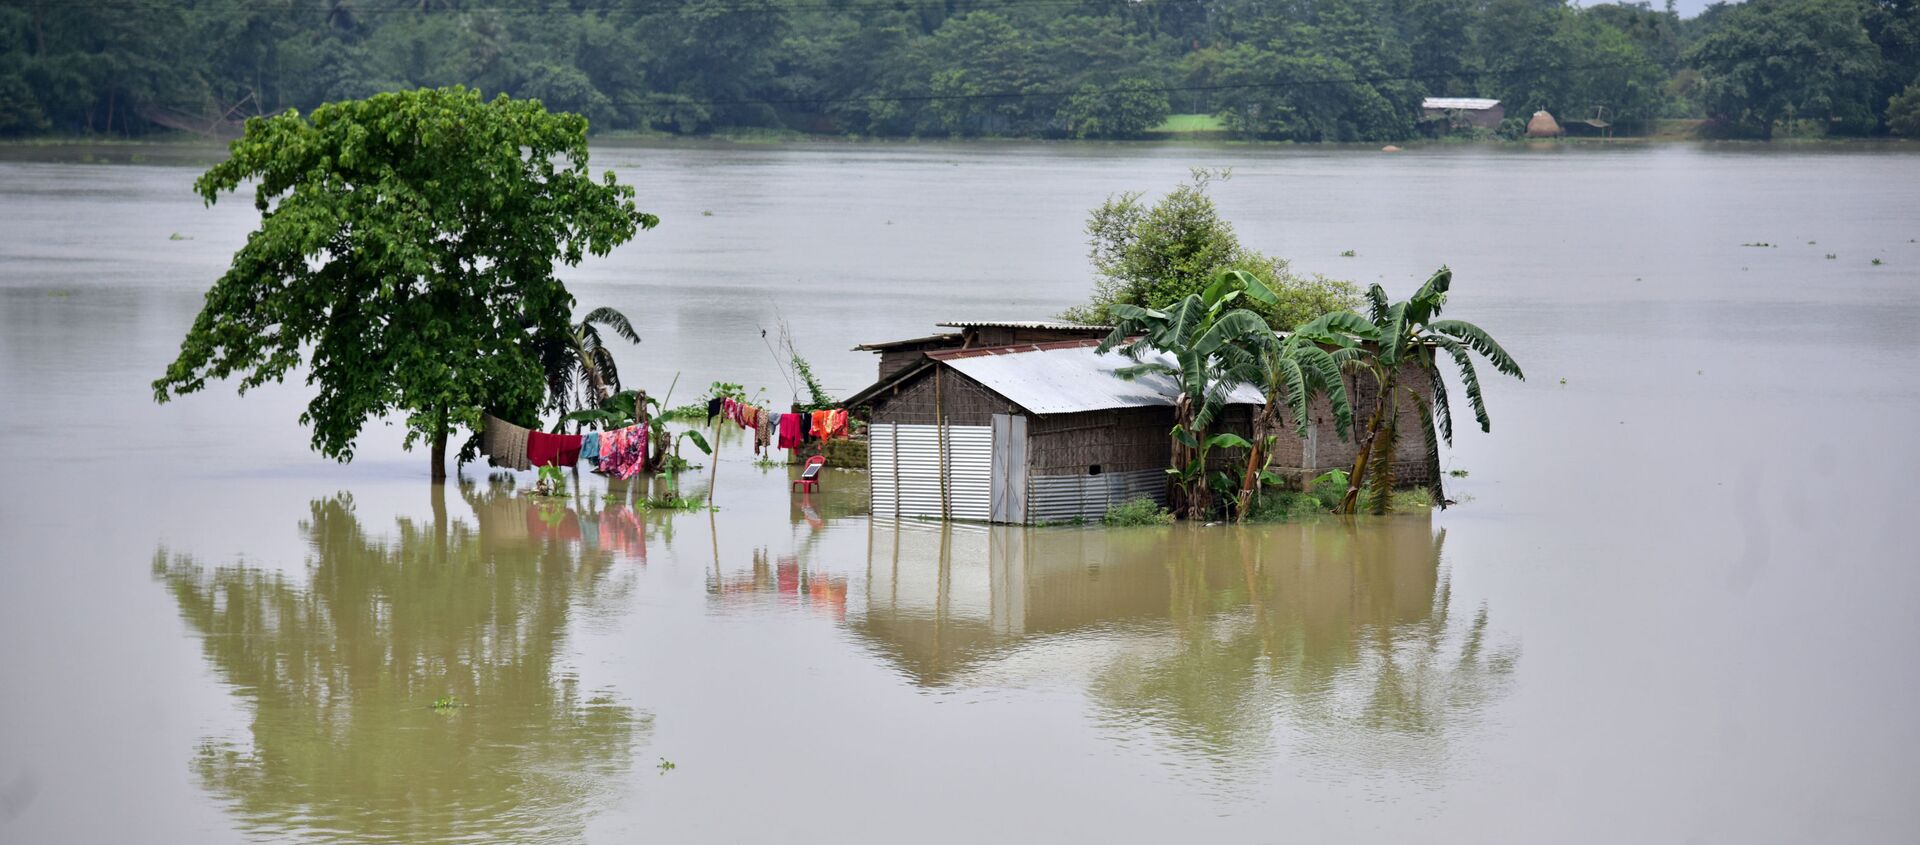 A partially submerged house is seen at the flood-affected Mayong village in Morigaon district, in the northeastern state of Assam, India, June 29, 2020 - Sputnik International, 1920, 20.07.2020